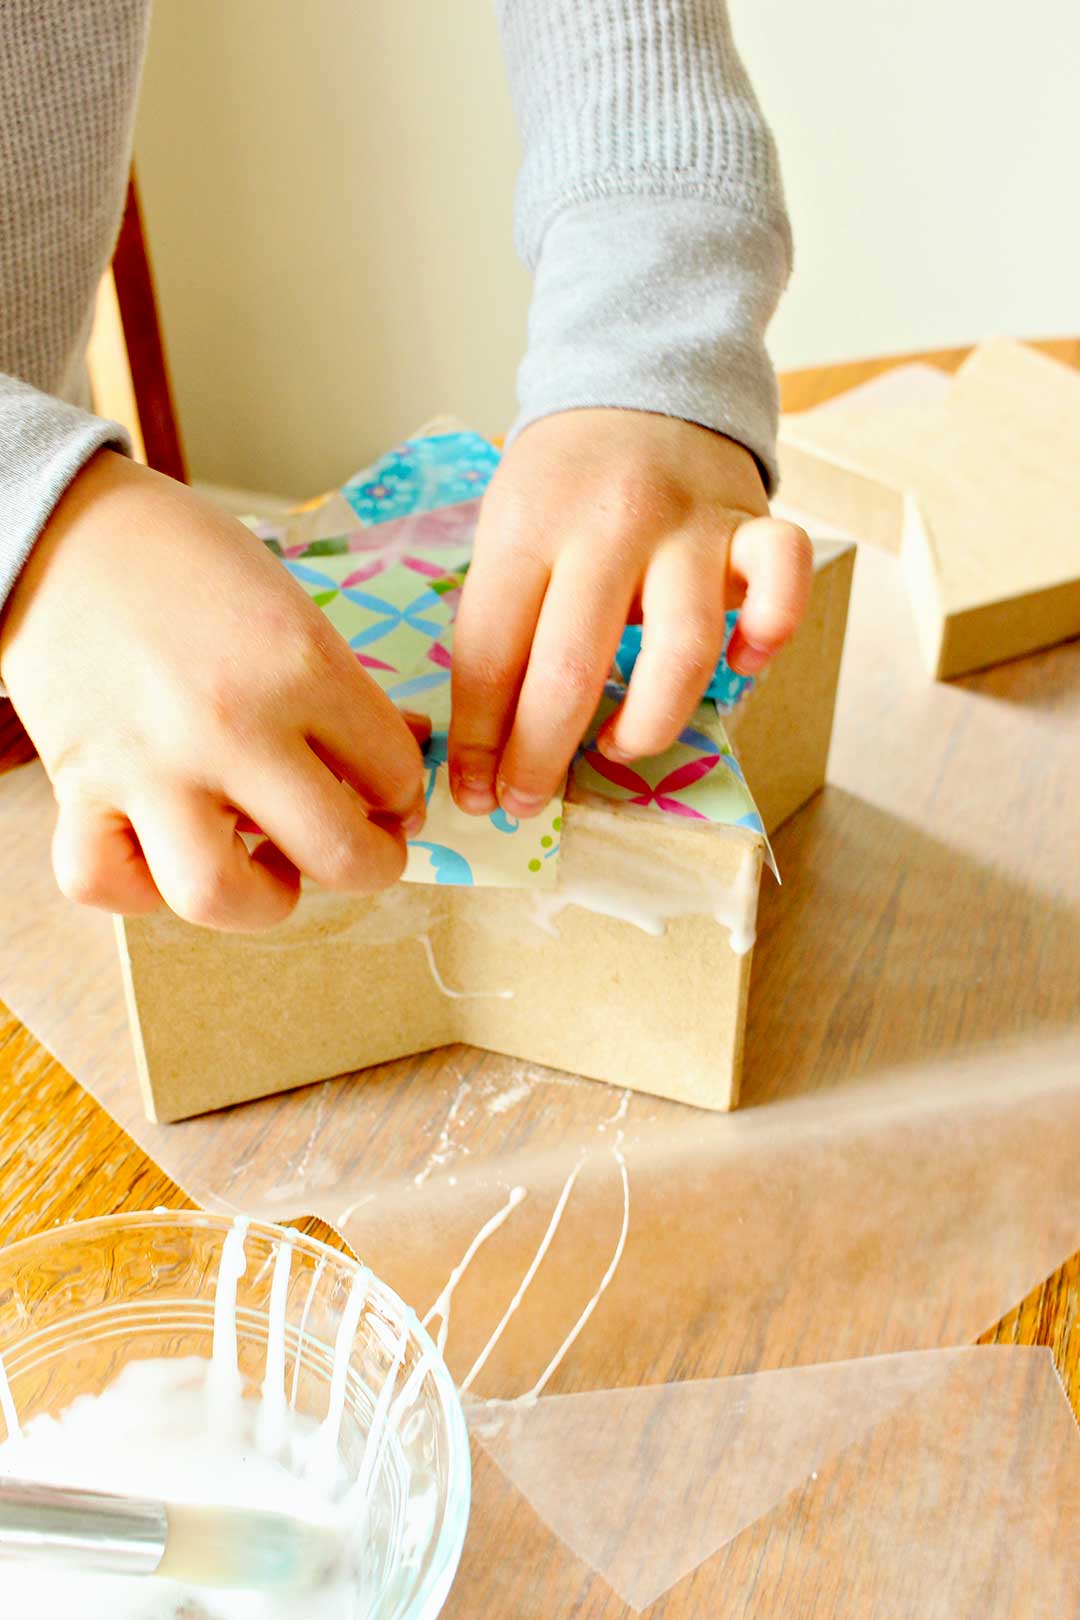 Close up view of child's hands pressing some colorful paper onto places where she painted Mod Podge onto her star shaped box.